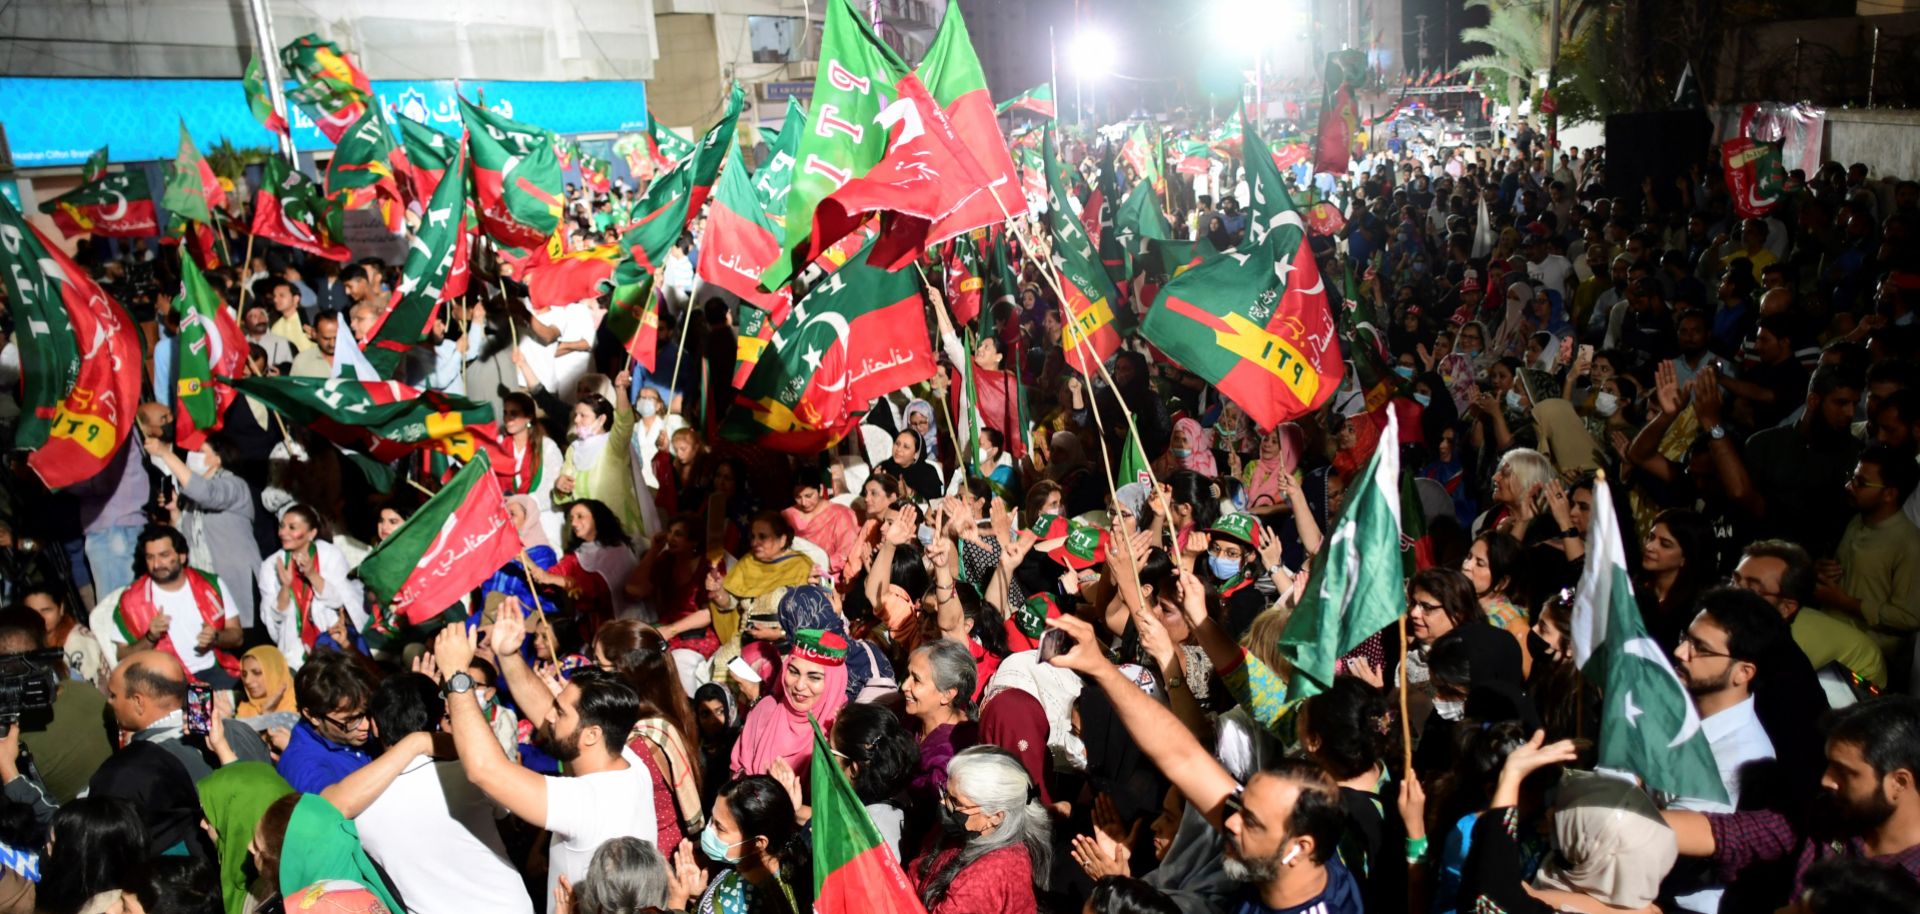 Supporters of the ruling Pakistan Tehreek-e-Insaf (PTI) party take part in a rally in Karachi on April 1, 2022, after debate on a no-confidence motion against Pakistani Prime Minister Imran Khan was postponed. 